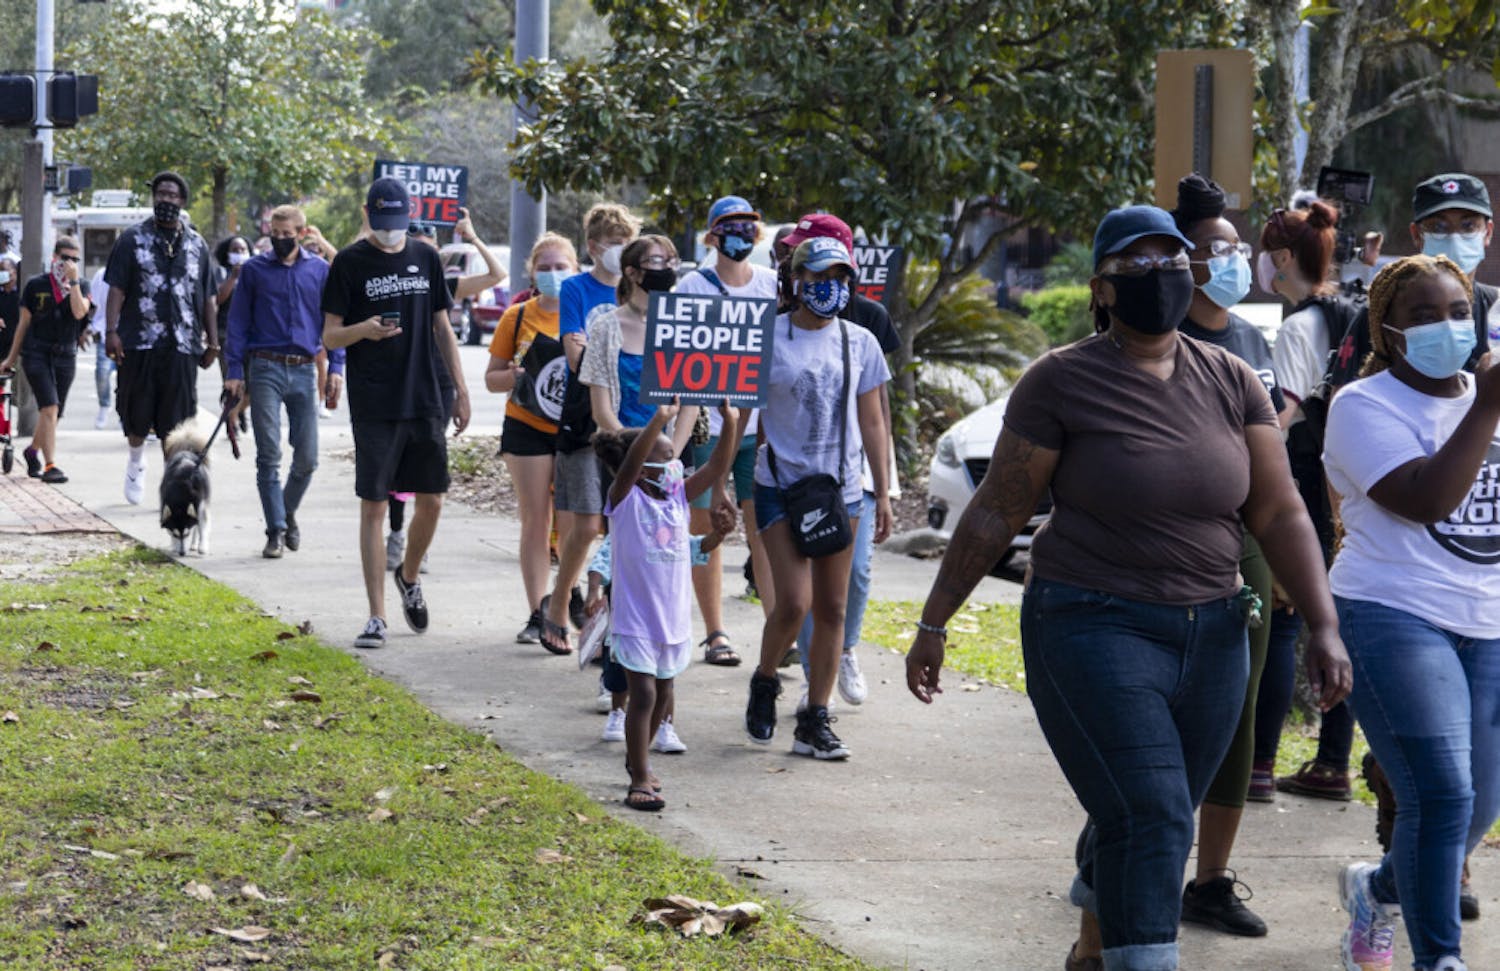 People are seen holding “Let My People Vote” signs at the "Free the Vote" rally while walking away from Bo Diddley Plaza on Saturday, Oct. 24, 2020.